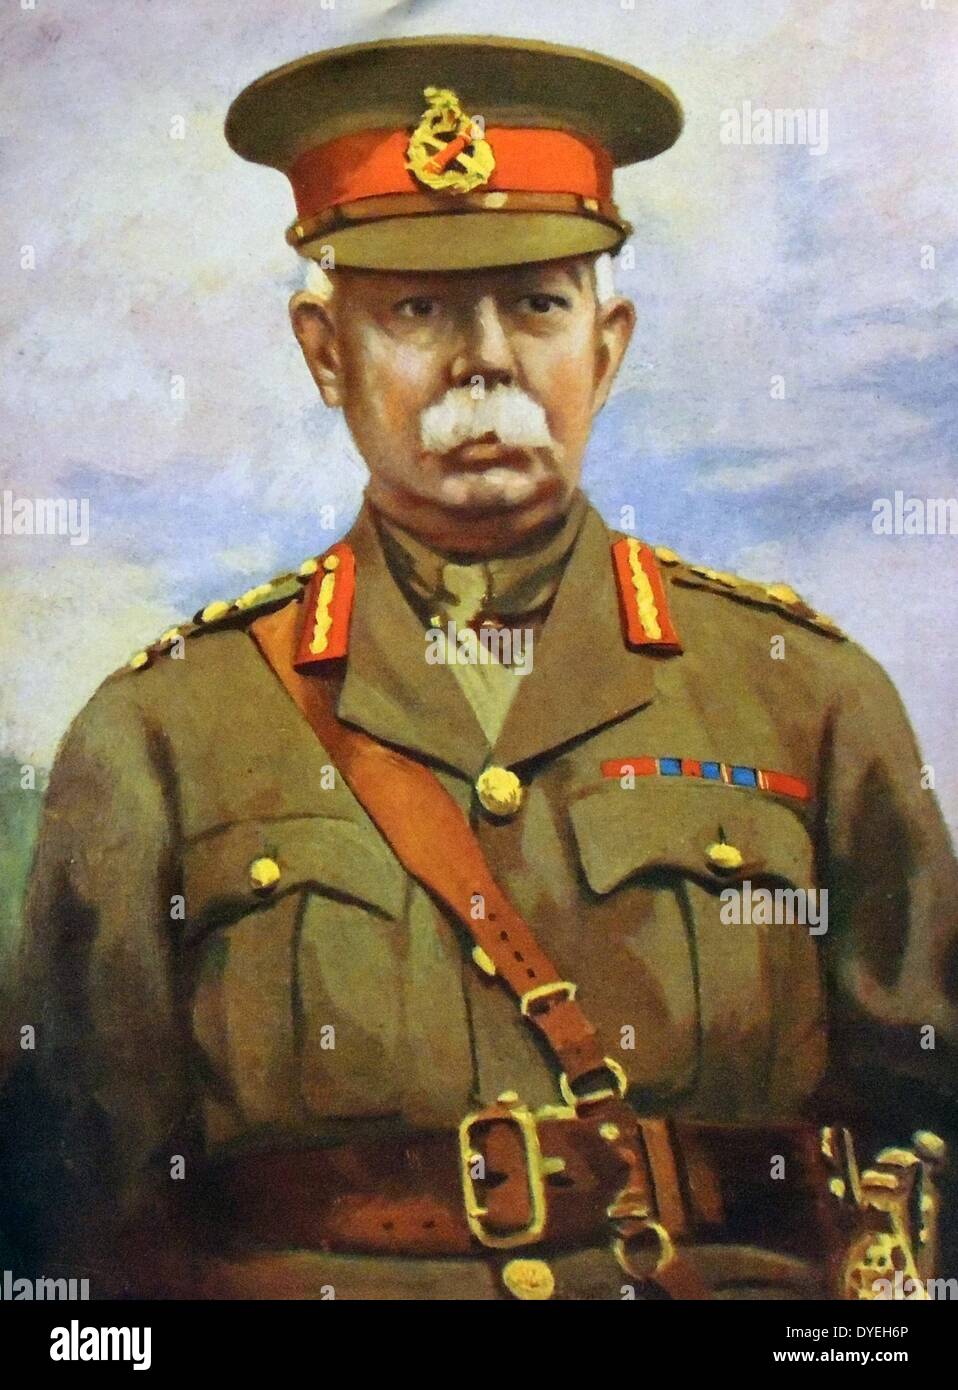 General Sir Herbert Charles Onslow Plumer (1857-1932), commanding the British Second Army. Born in Torquay. Educated at Eton, he entered the army in 1876 with a commission as a sub-lieutenant in the 65th Regiment of Foot. Stock Photo